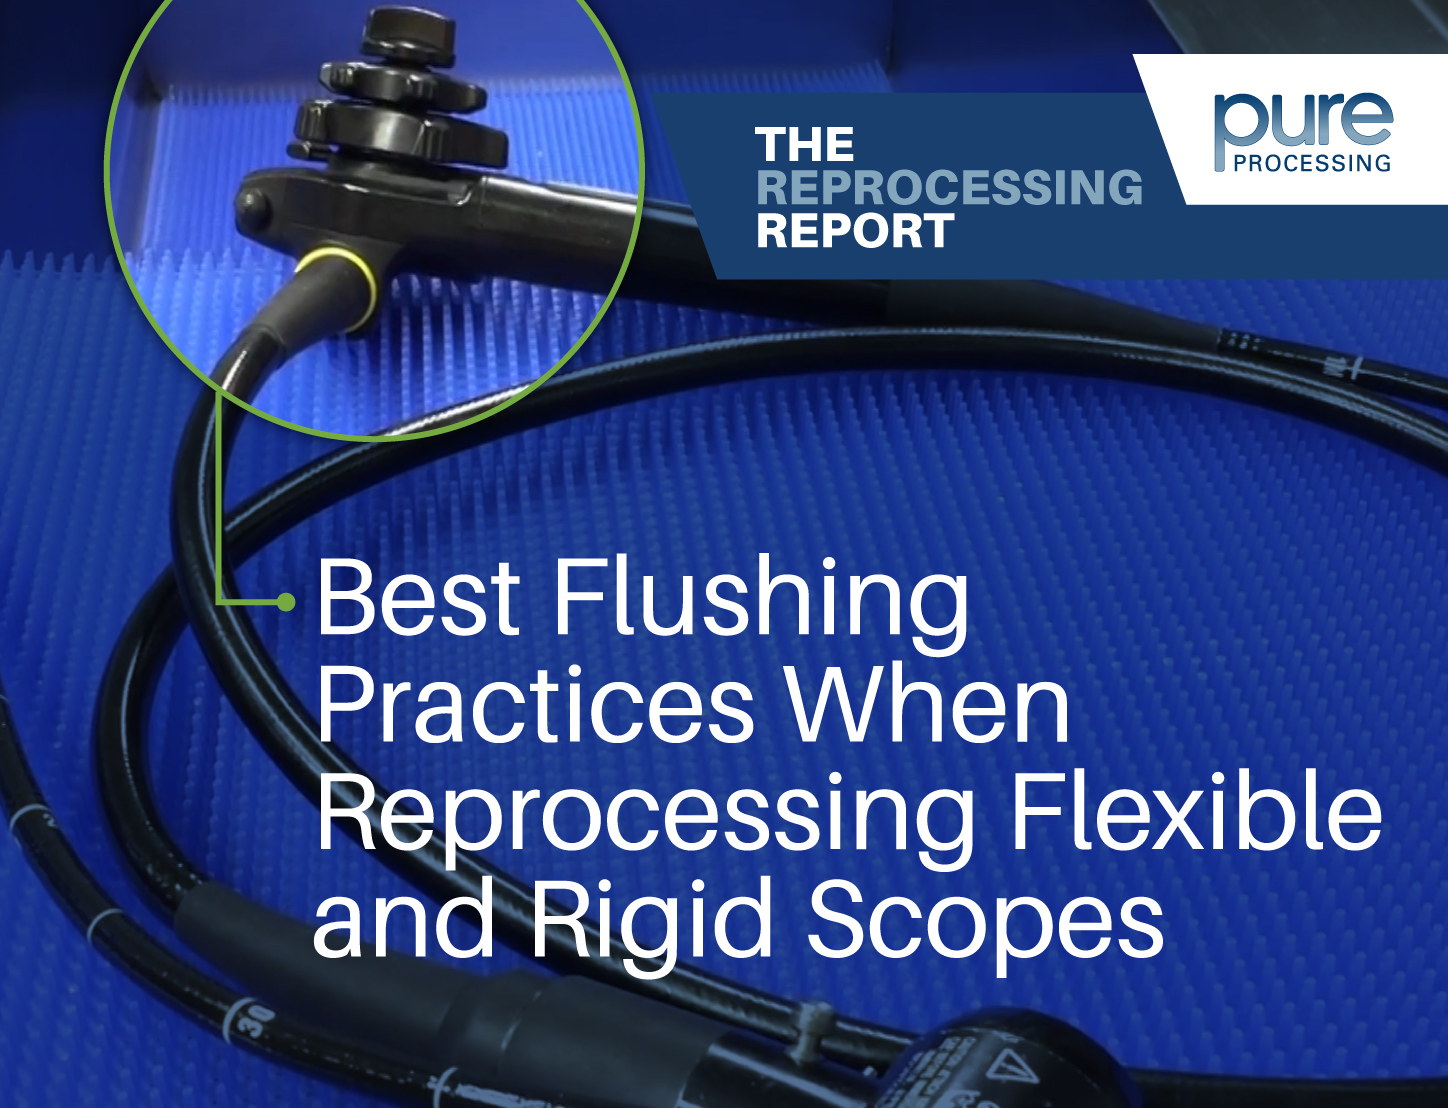 Best Flushing Practices When Reprocessing Flexible and Rigid Scopes